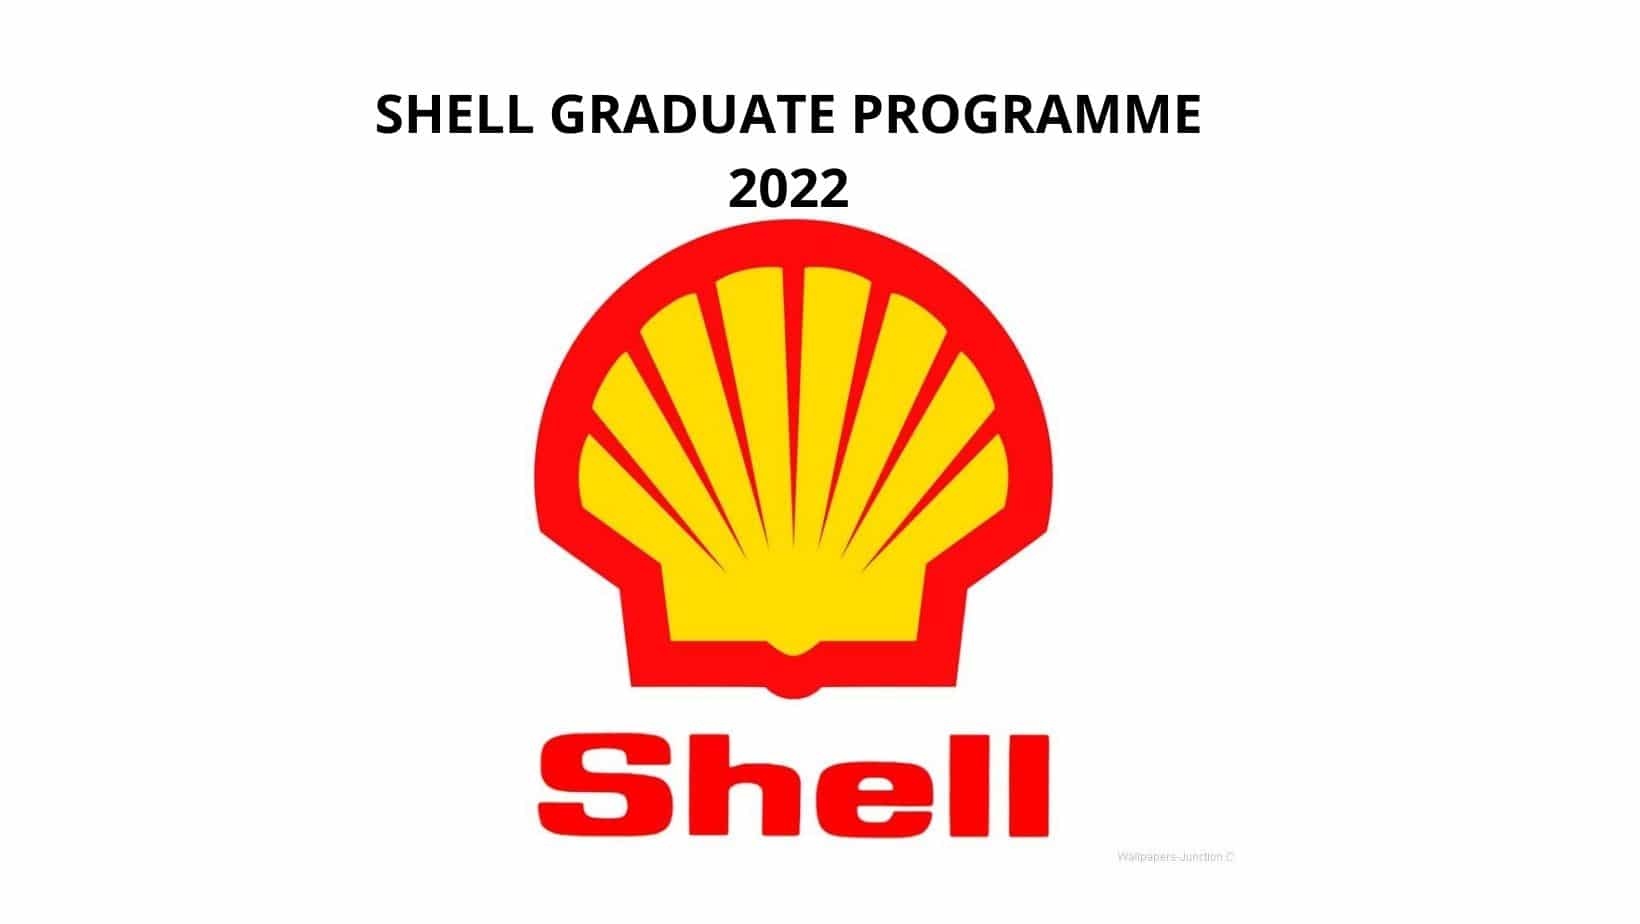 Apply For 2022 SHELL Graduate Programme